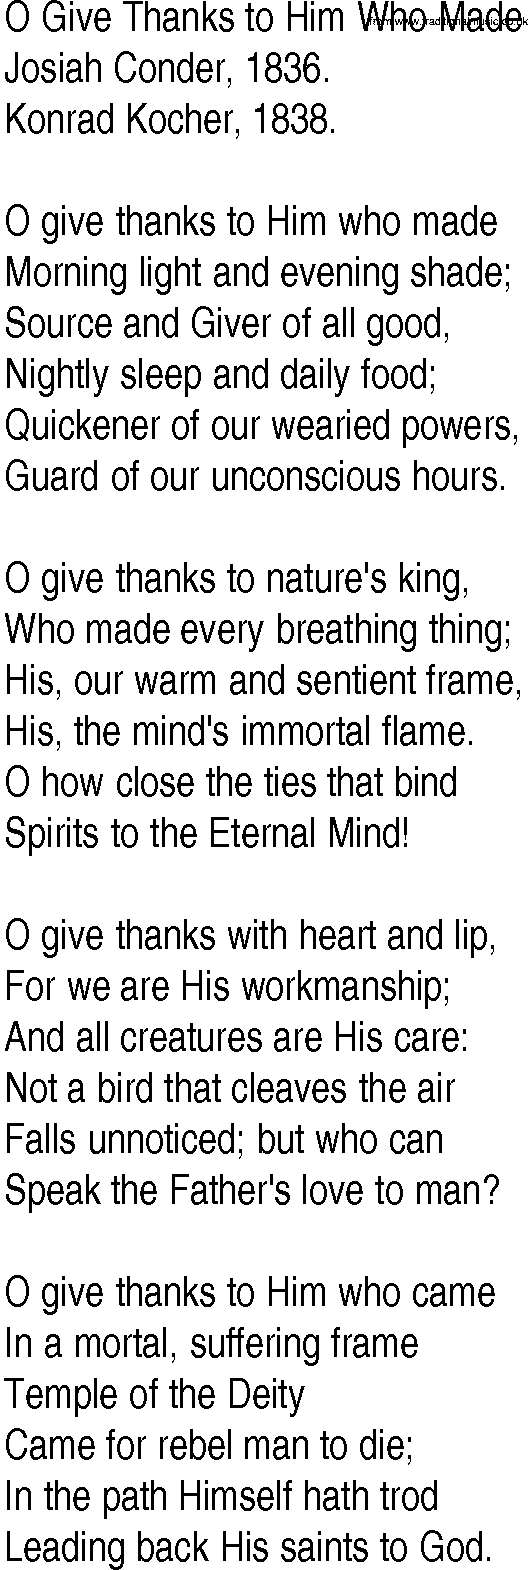 Hymn and Gospel Song: O Give Thanks to Him Who Made by Josiah Conder lyrics